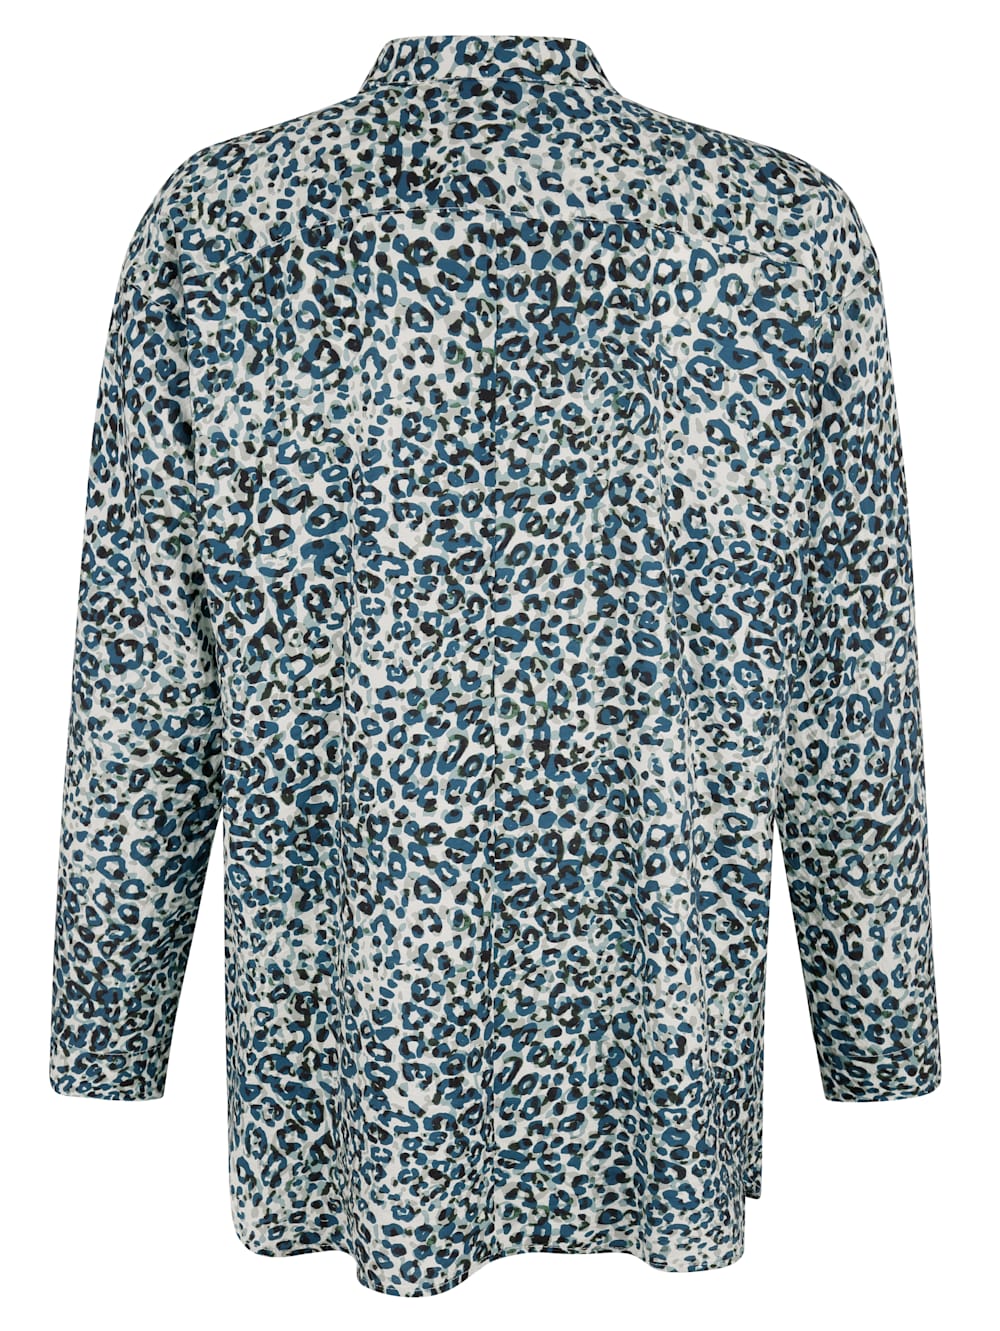 Delmod pure Bluse in tollem Leo-Muster | Wenz